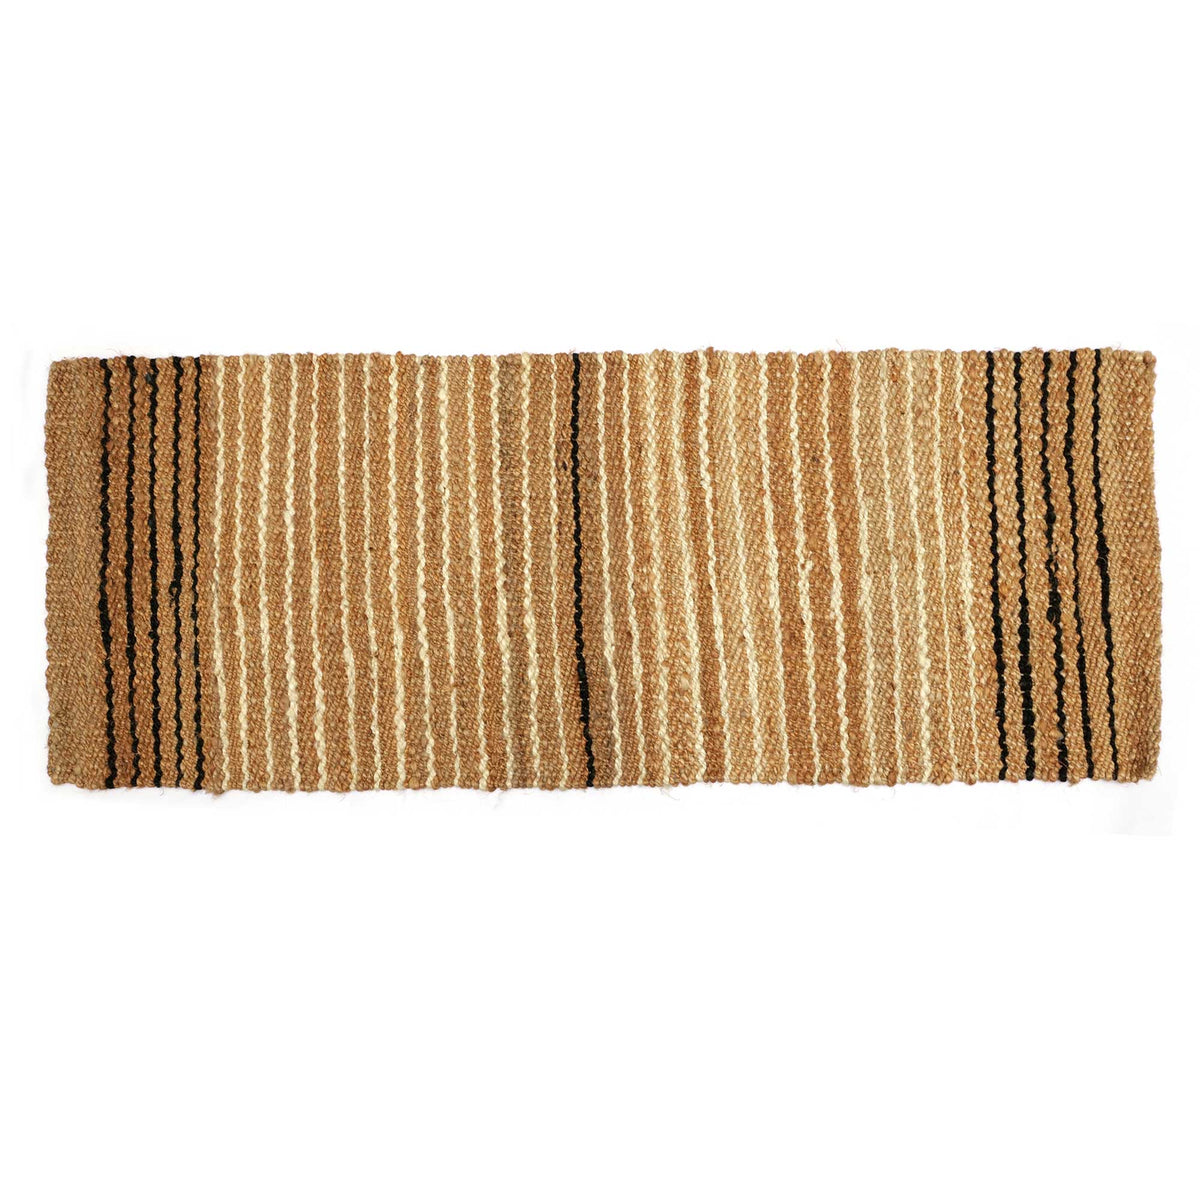 OnlyMat Monochrome Lines - Luxe Rug - handmade Jute Carpet - Organic and Sustainable